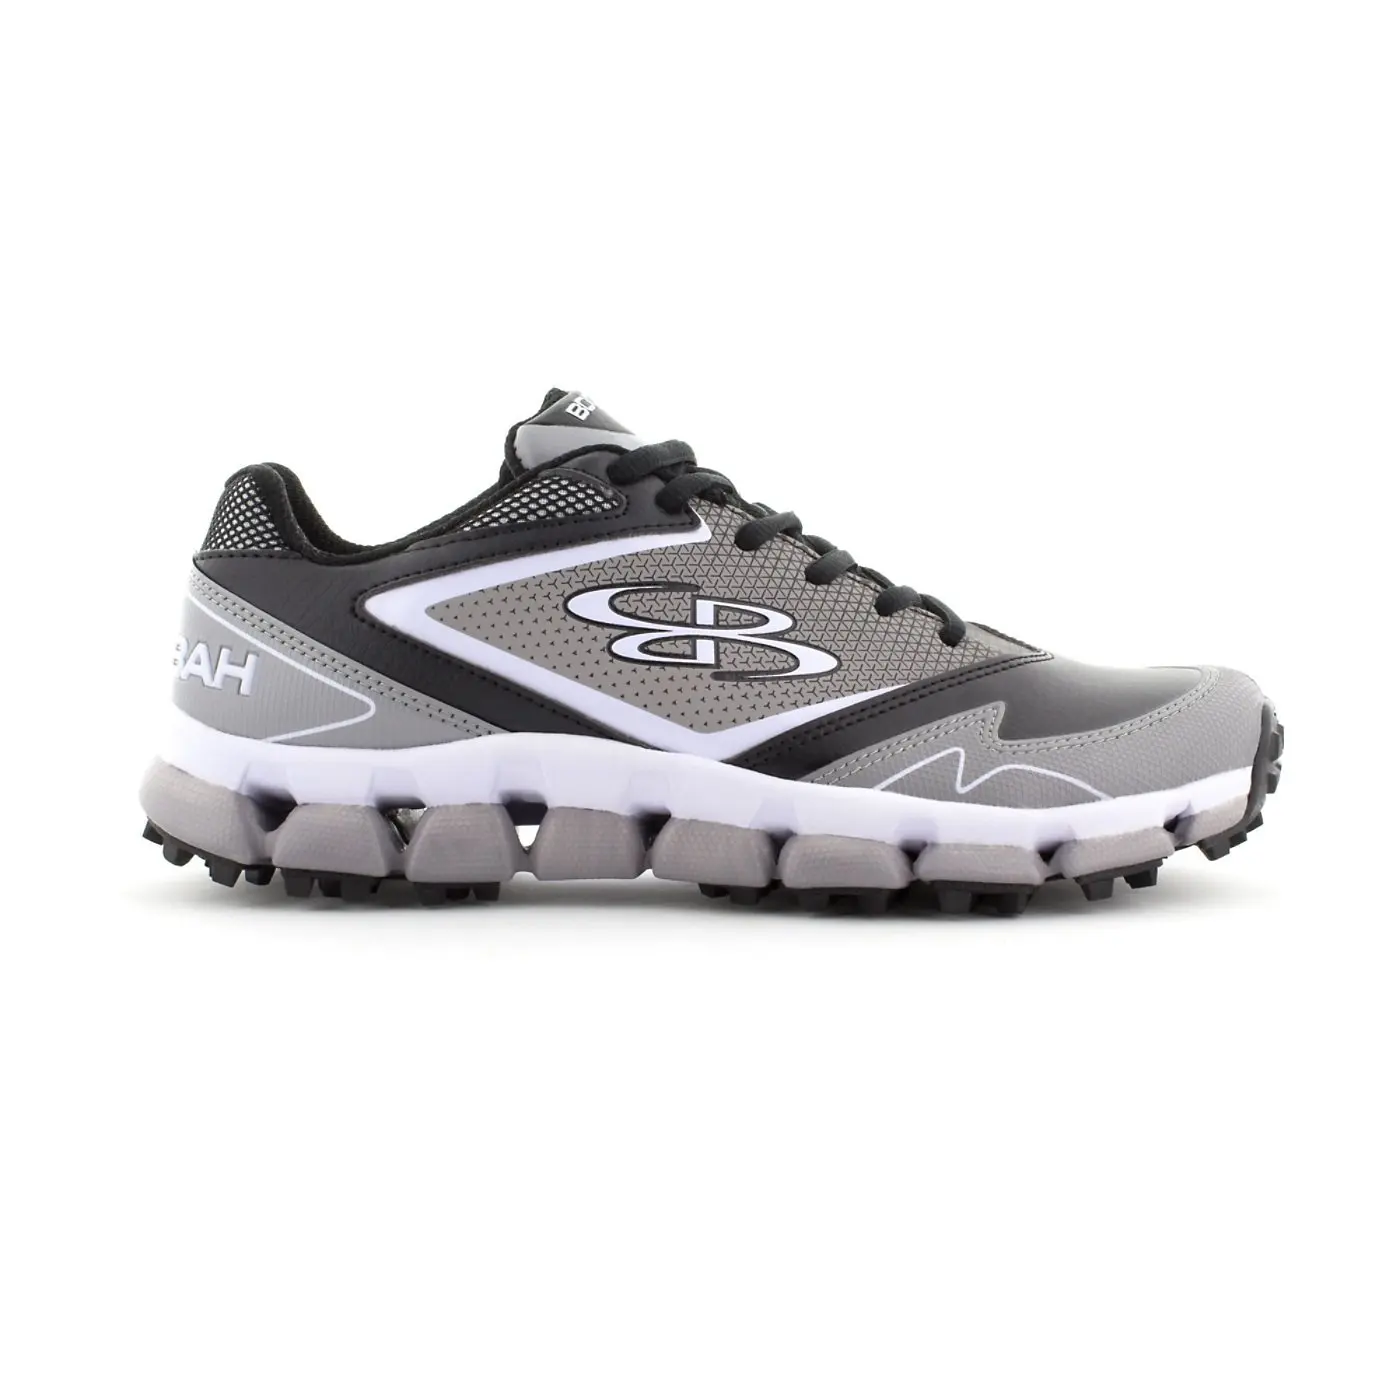 Cheap Boombah Turf Shoes, find Boombah 